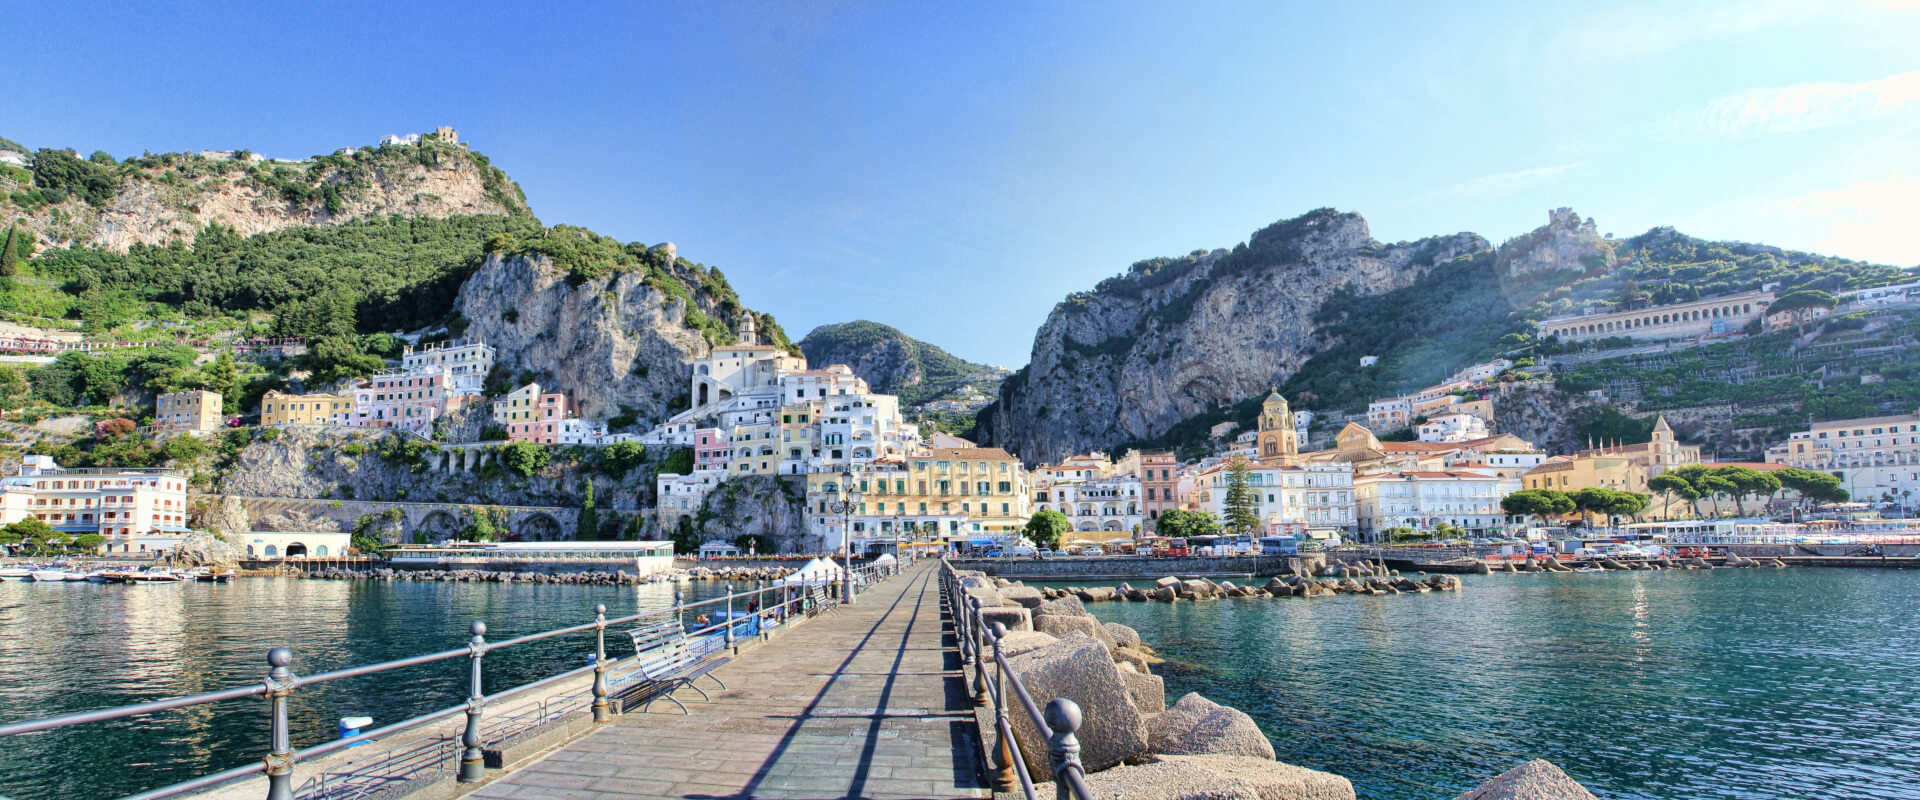 The view of Amalfi from the pier.